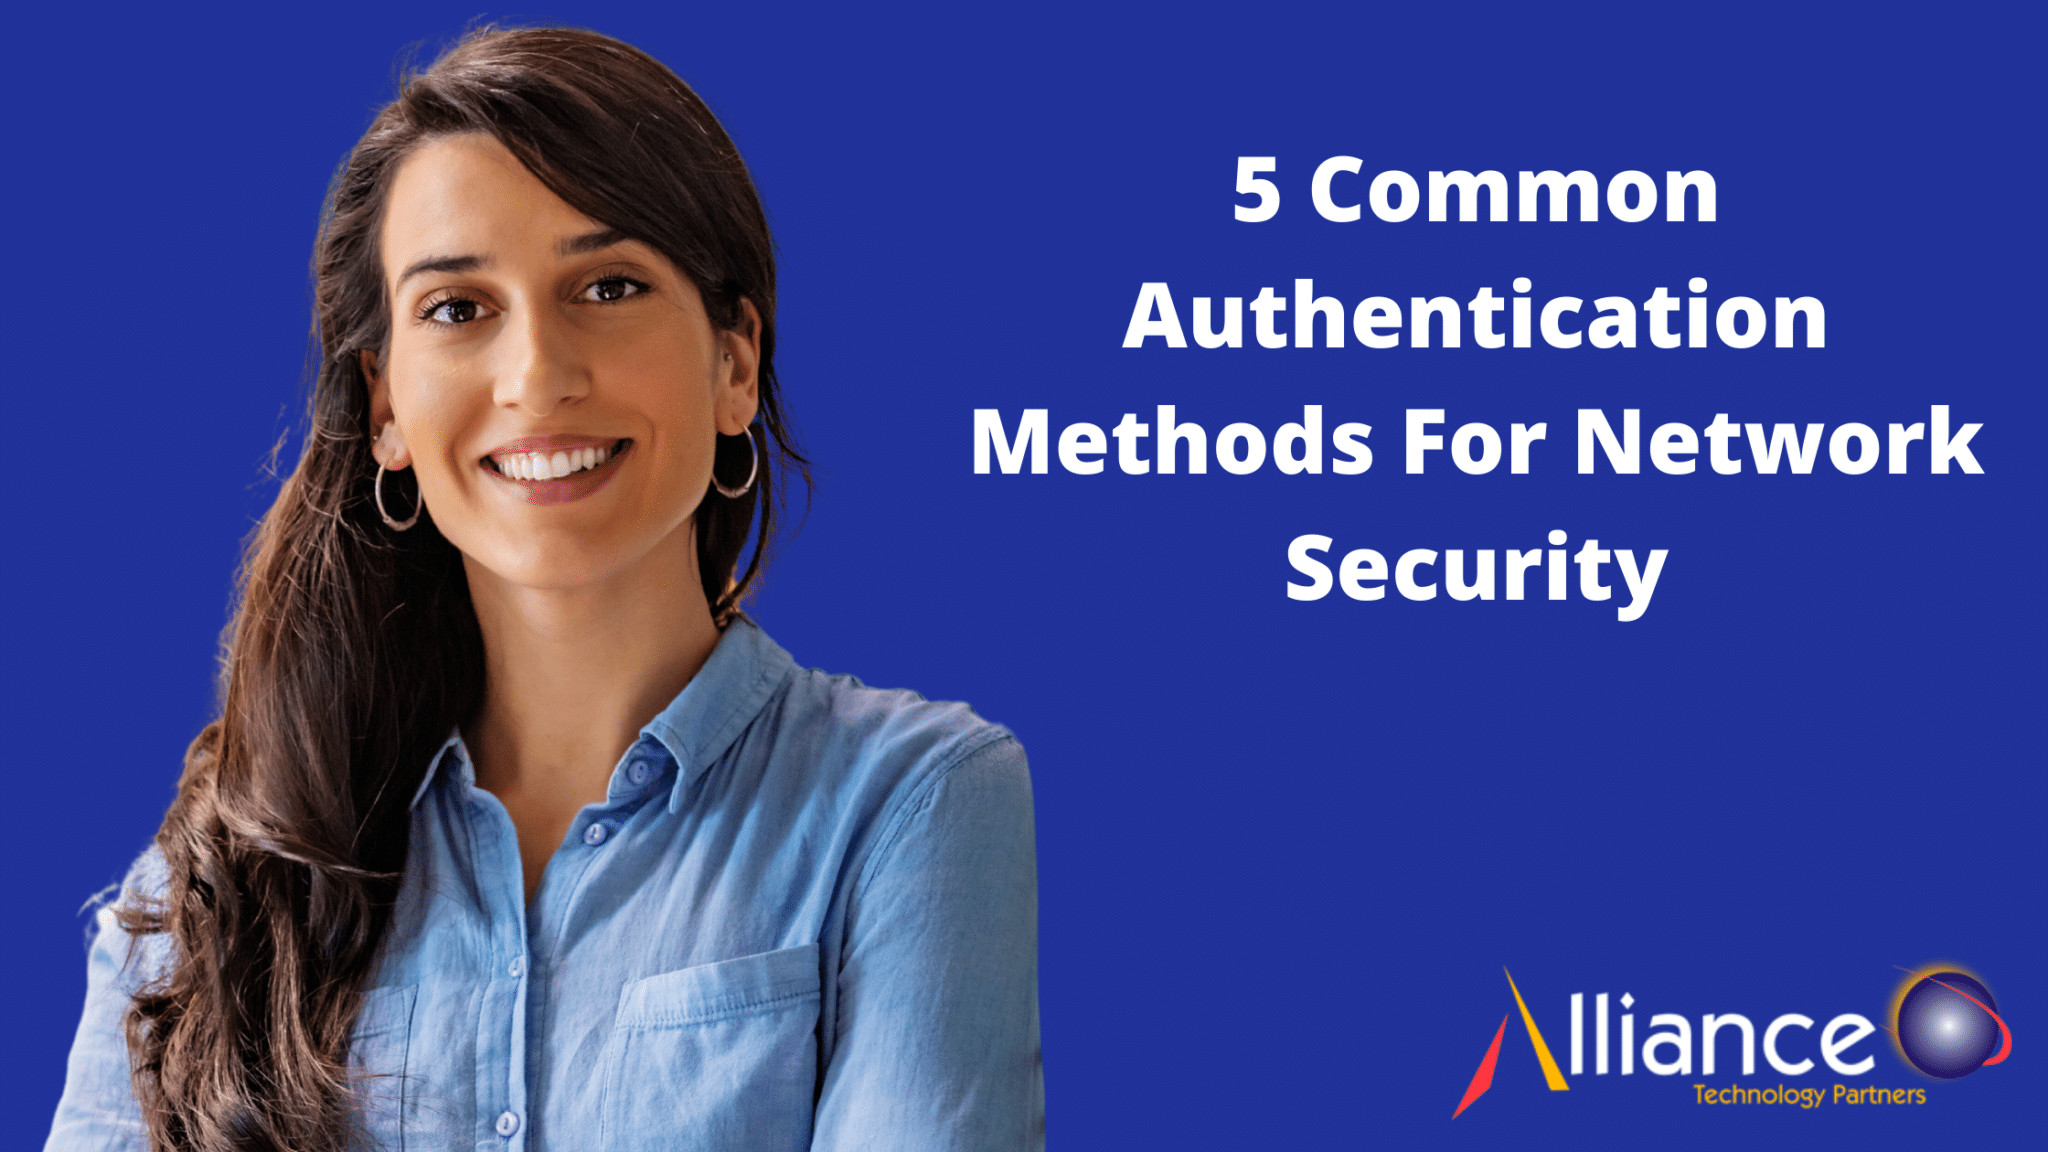 5 Common Authentication Methods For Network Security